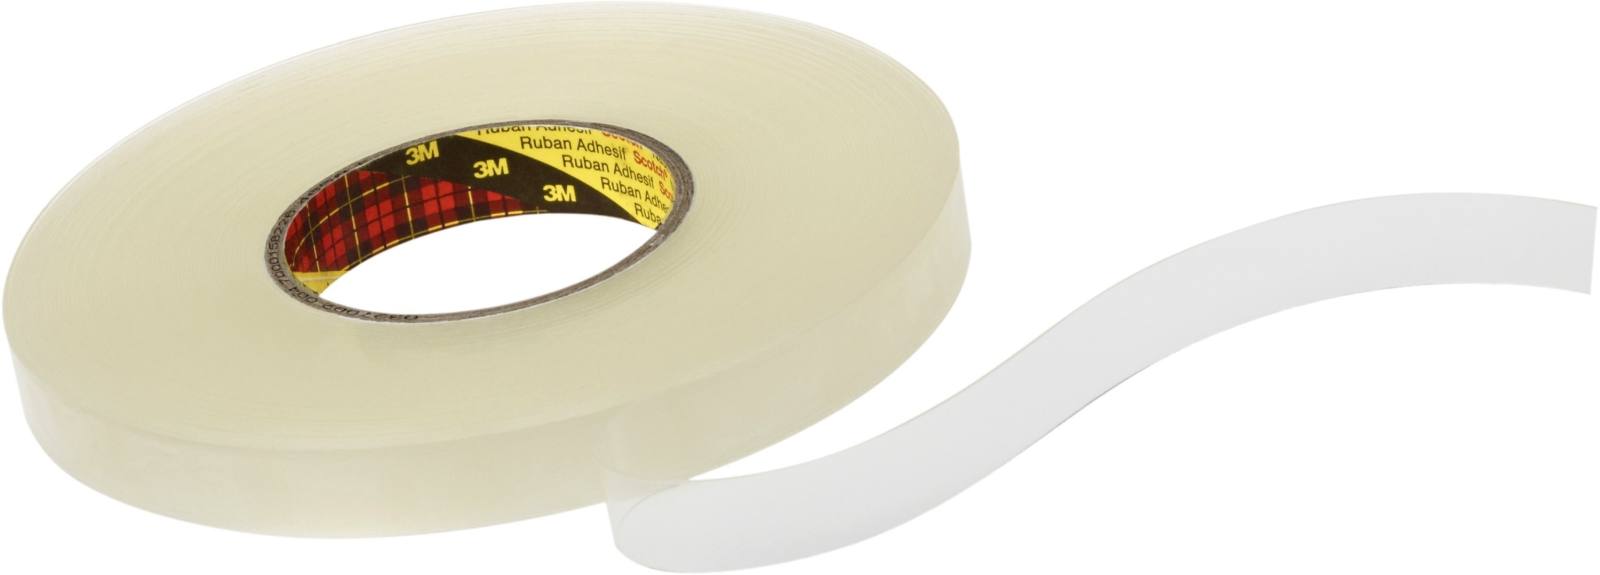 3M Double-sided removable adhesive tape 4658F, transparent, 8 mm x 25 m, 0.8 mm